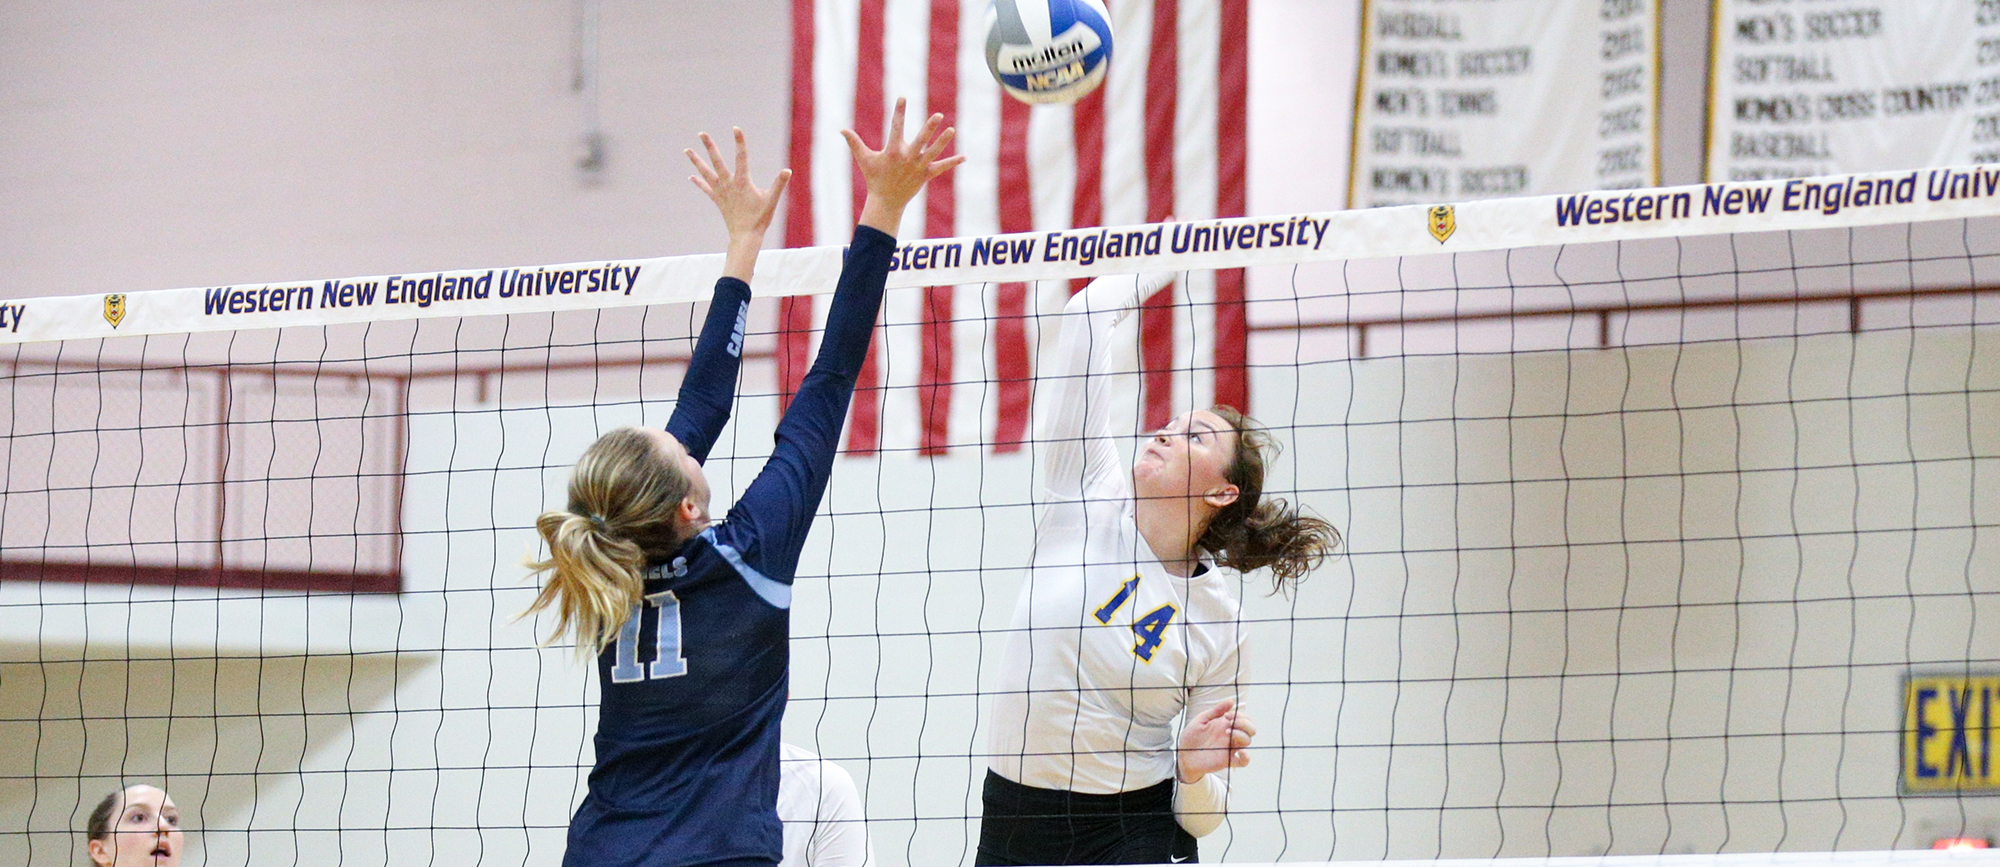 Senior Jenna Ferguson recorded a career-high 17 kills in Western New England's 3-1 win at UNE on Saturday. (Photo by Chris Marion)